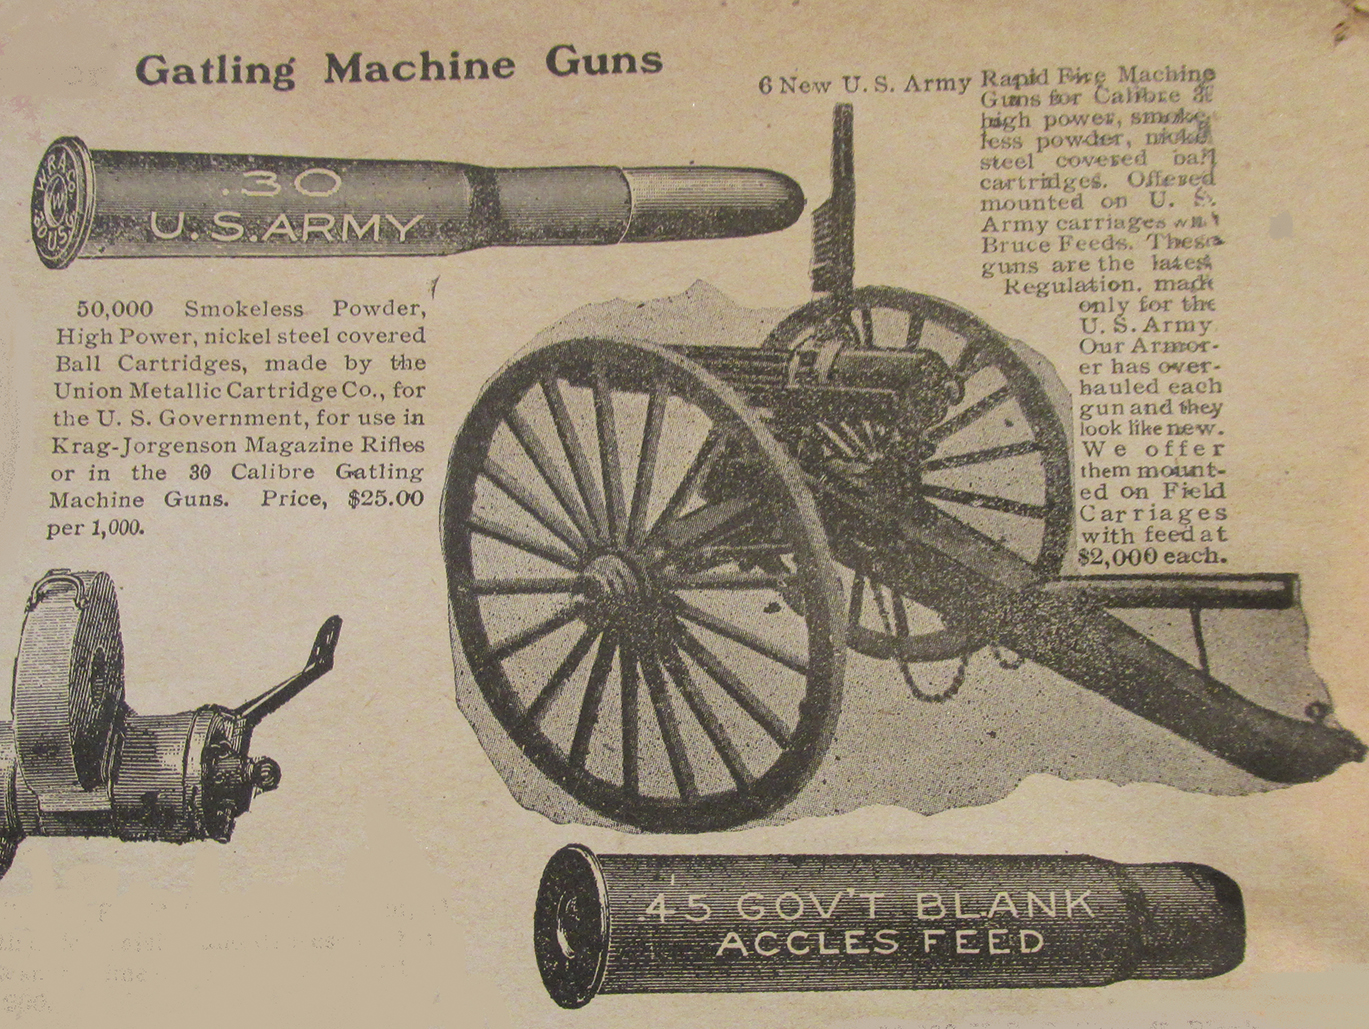 One of several Gatling guns Bannerman offered for sale and one of the 50,000 cartridges available.